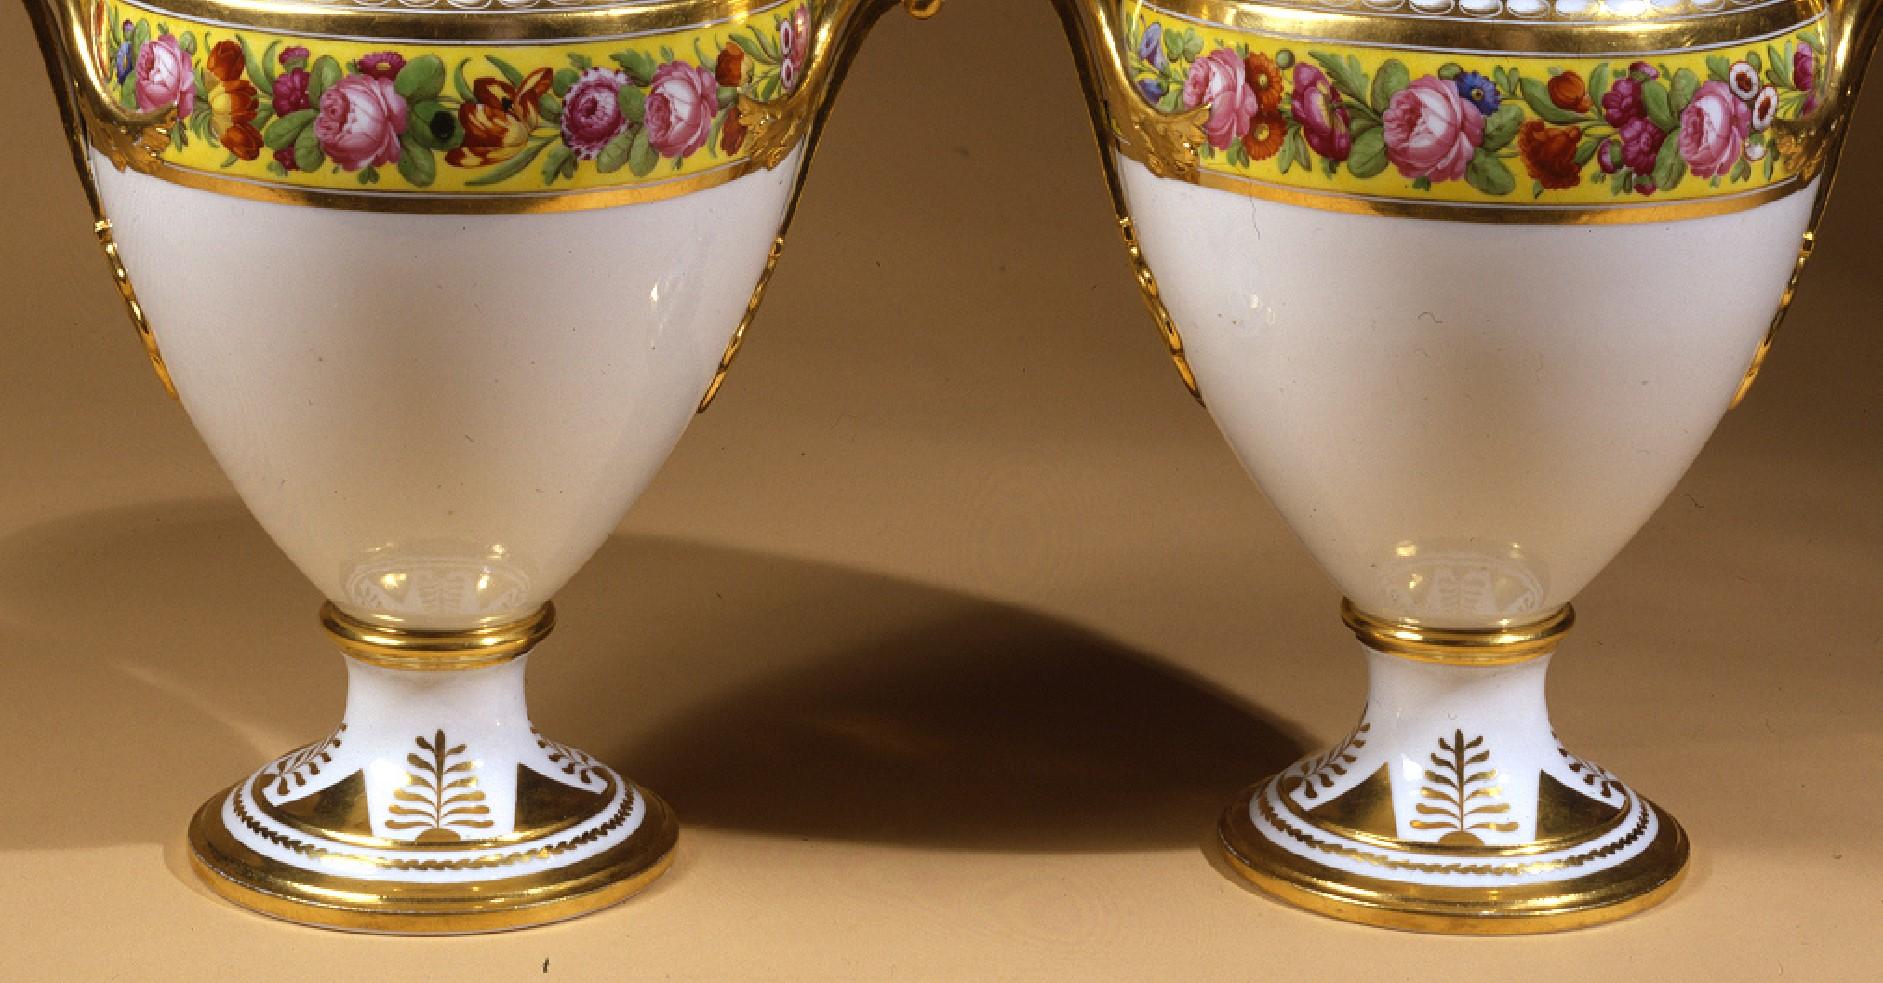 Gilt Pair of “Old Paris” Porcelain Coolers, Yellow Bands, Floral Wreaths For Sale